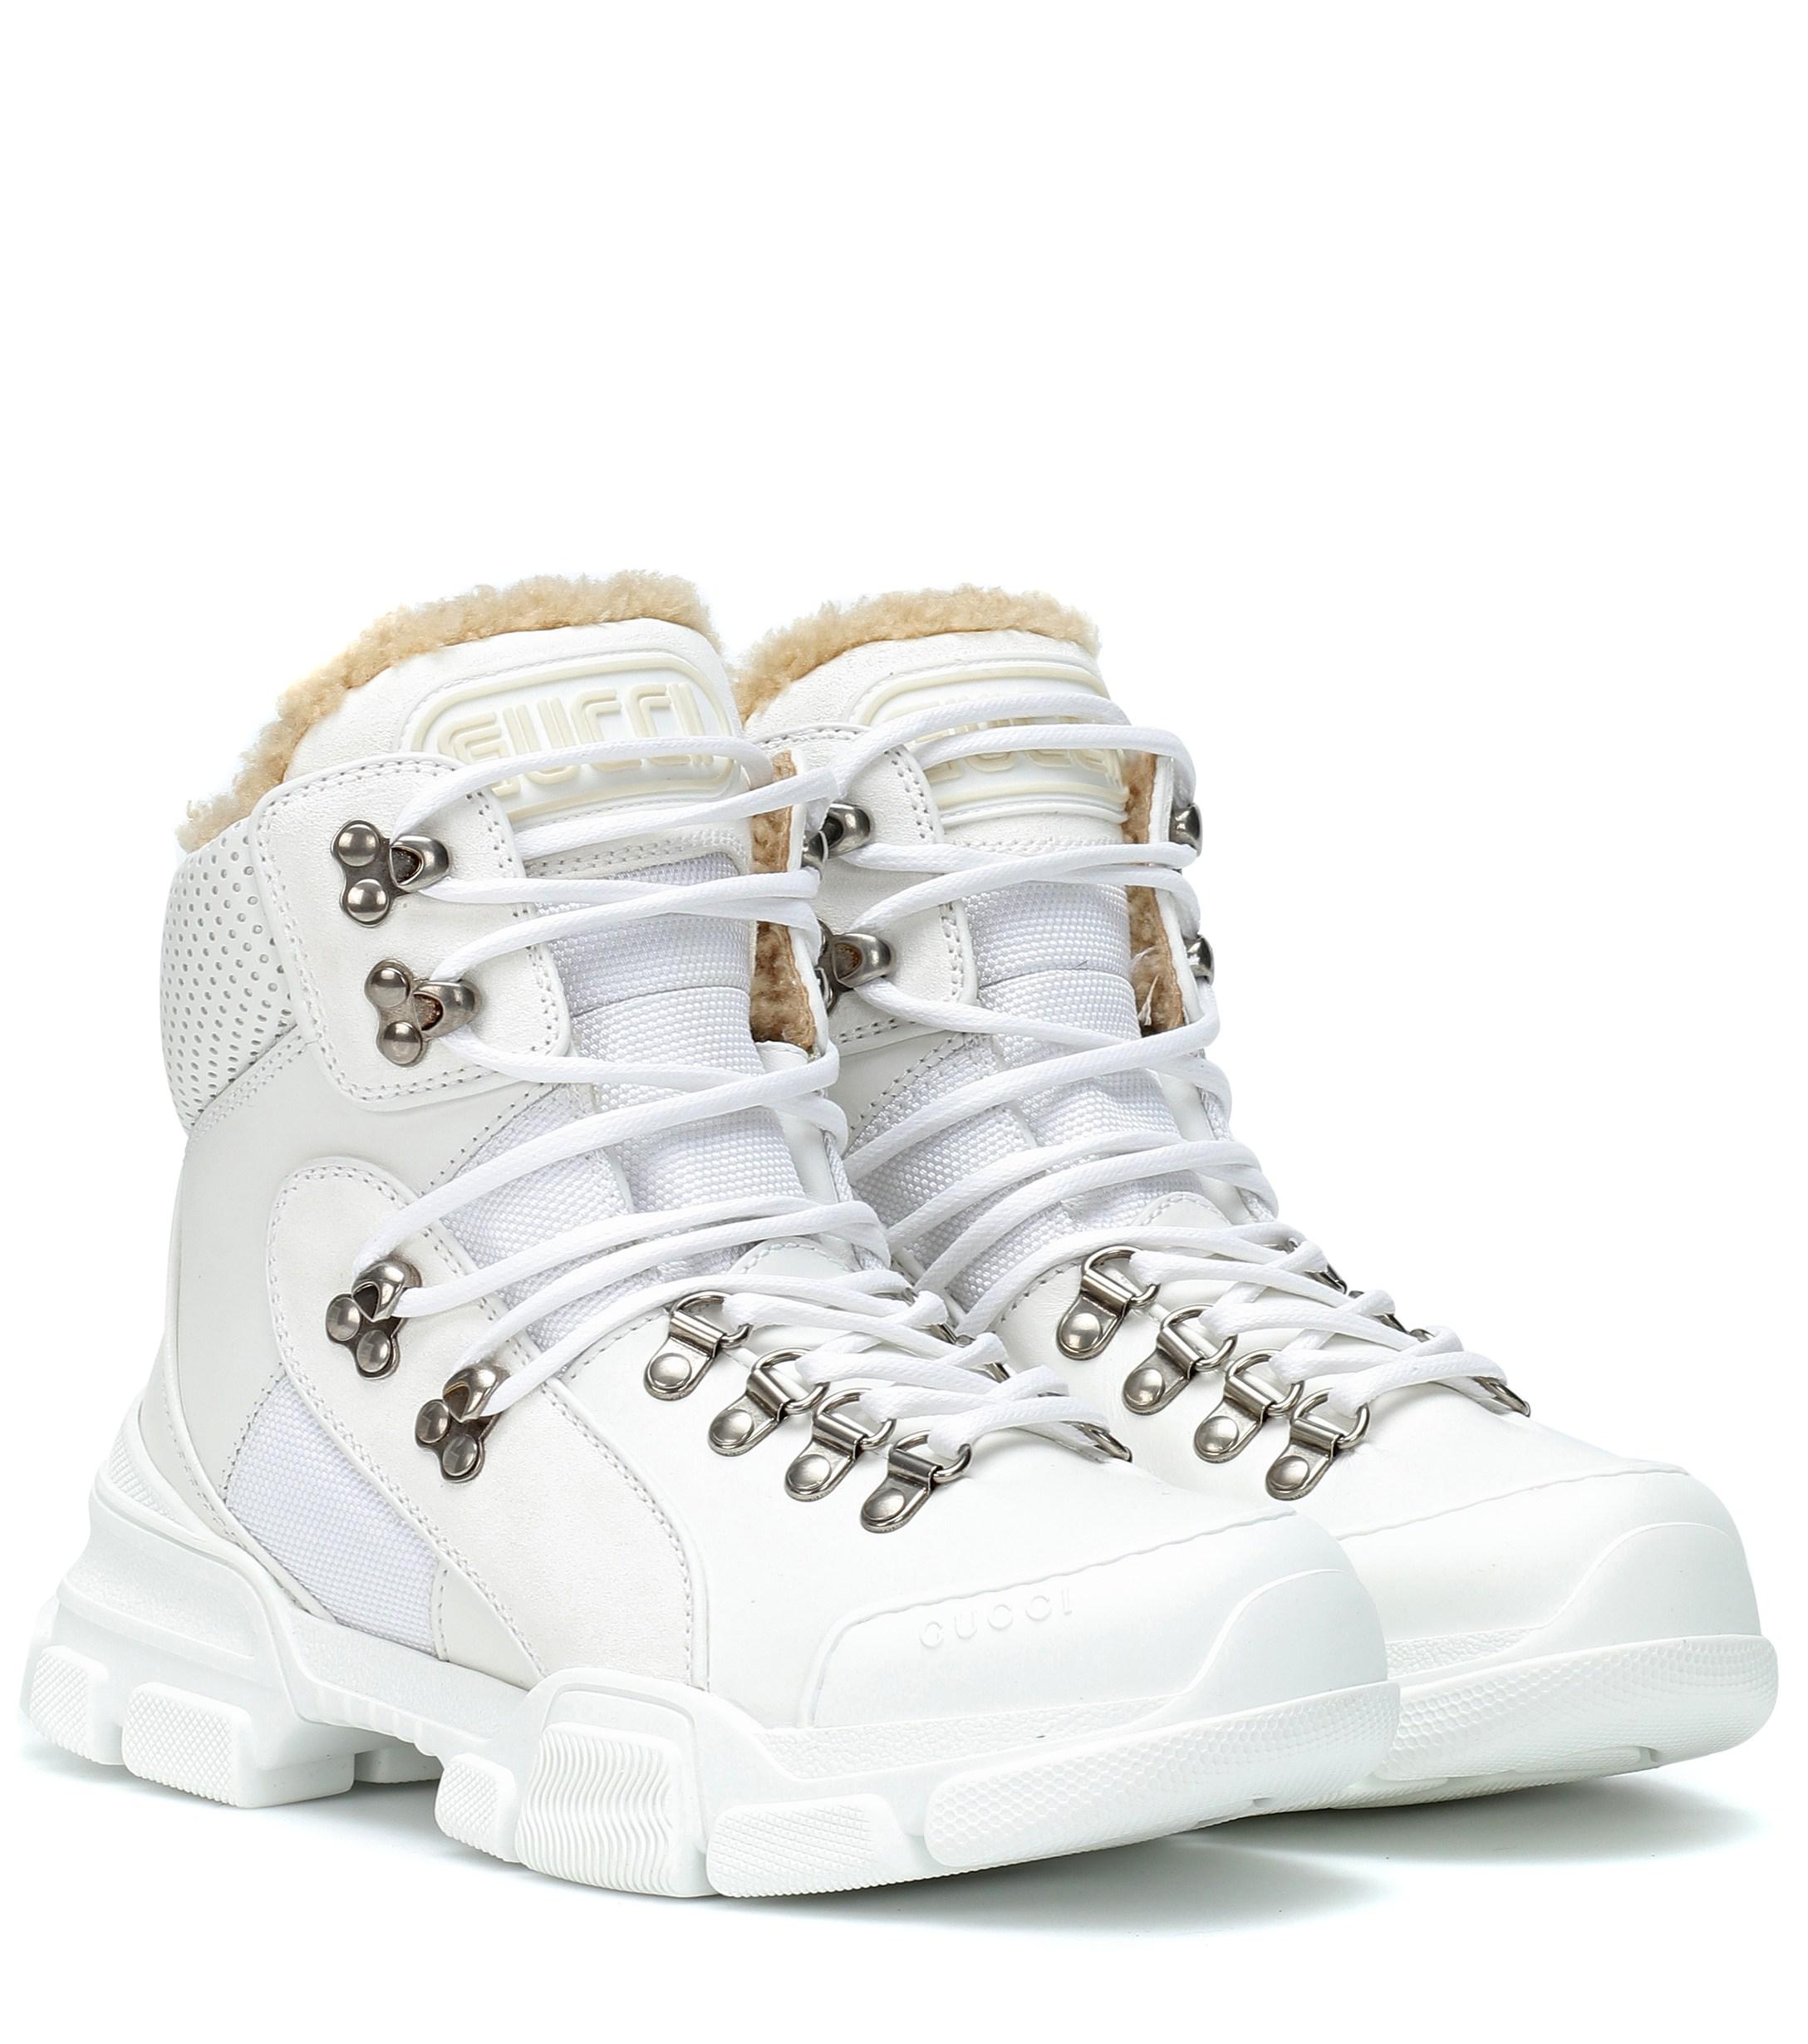 Gucci Flashtrek Leather Ankle Boots in White | Lyst